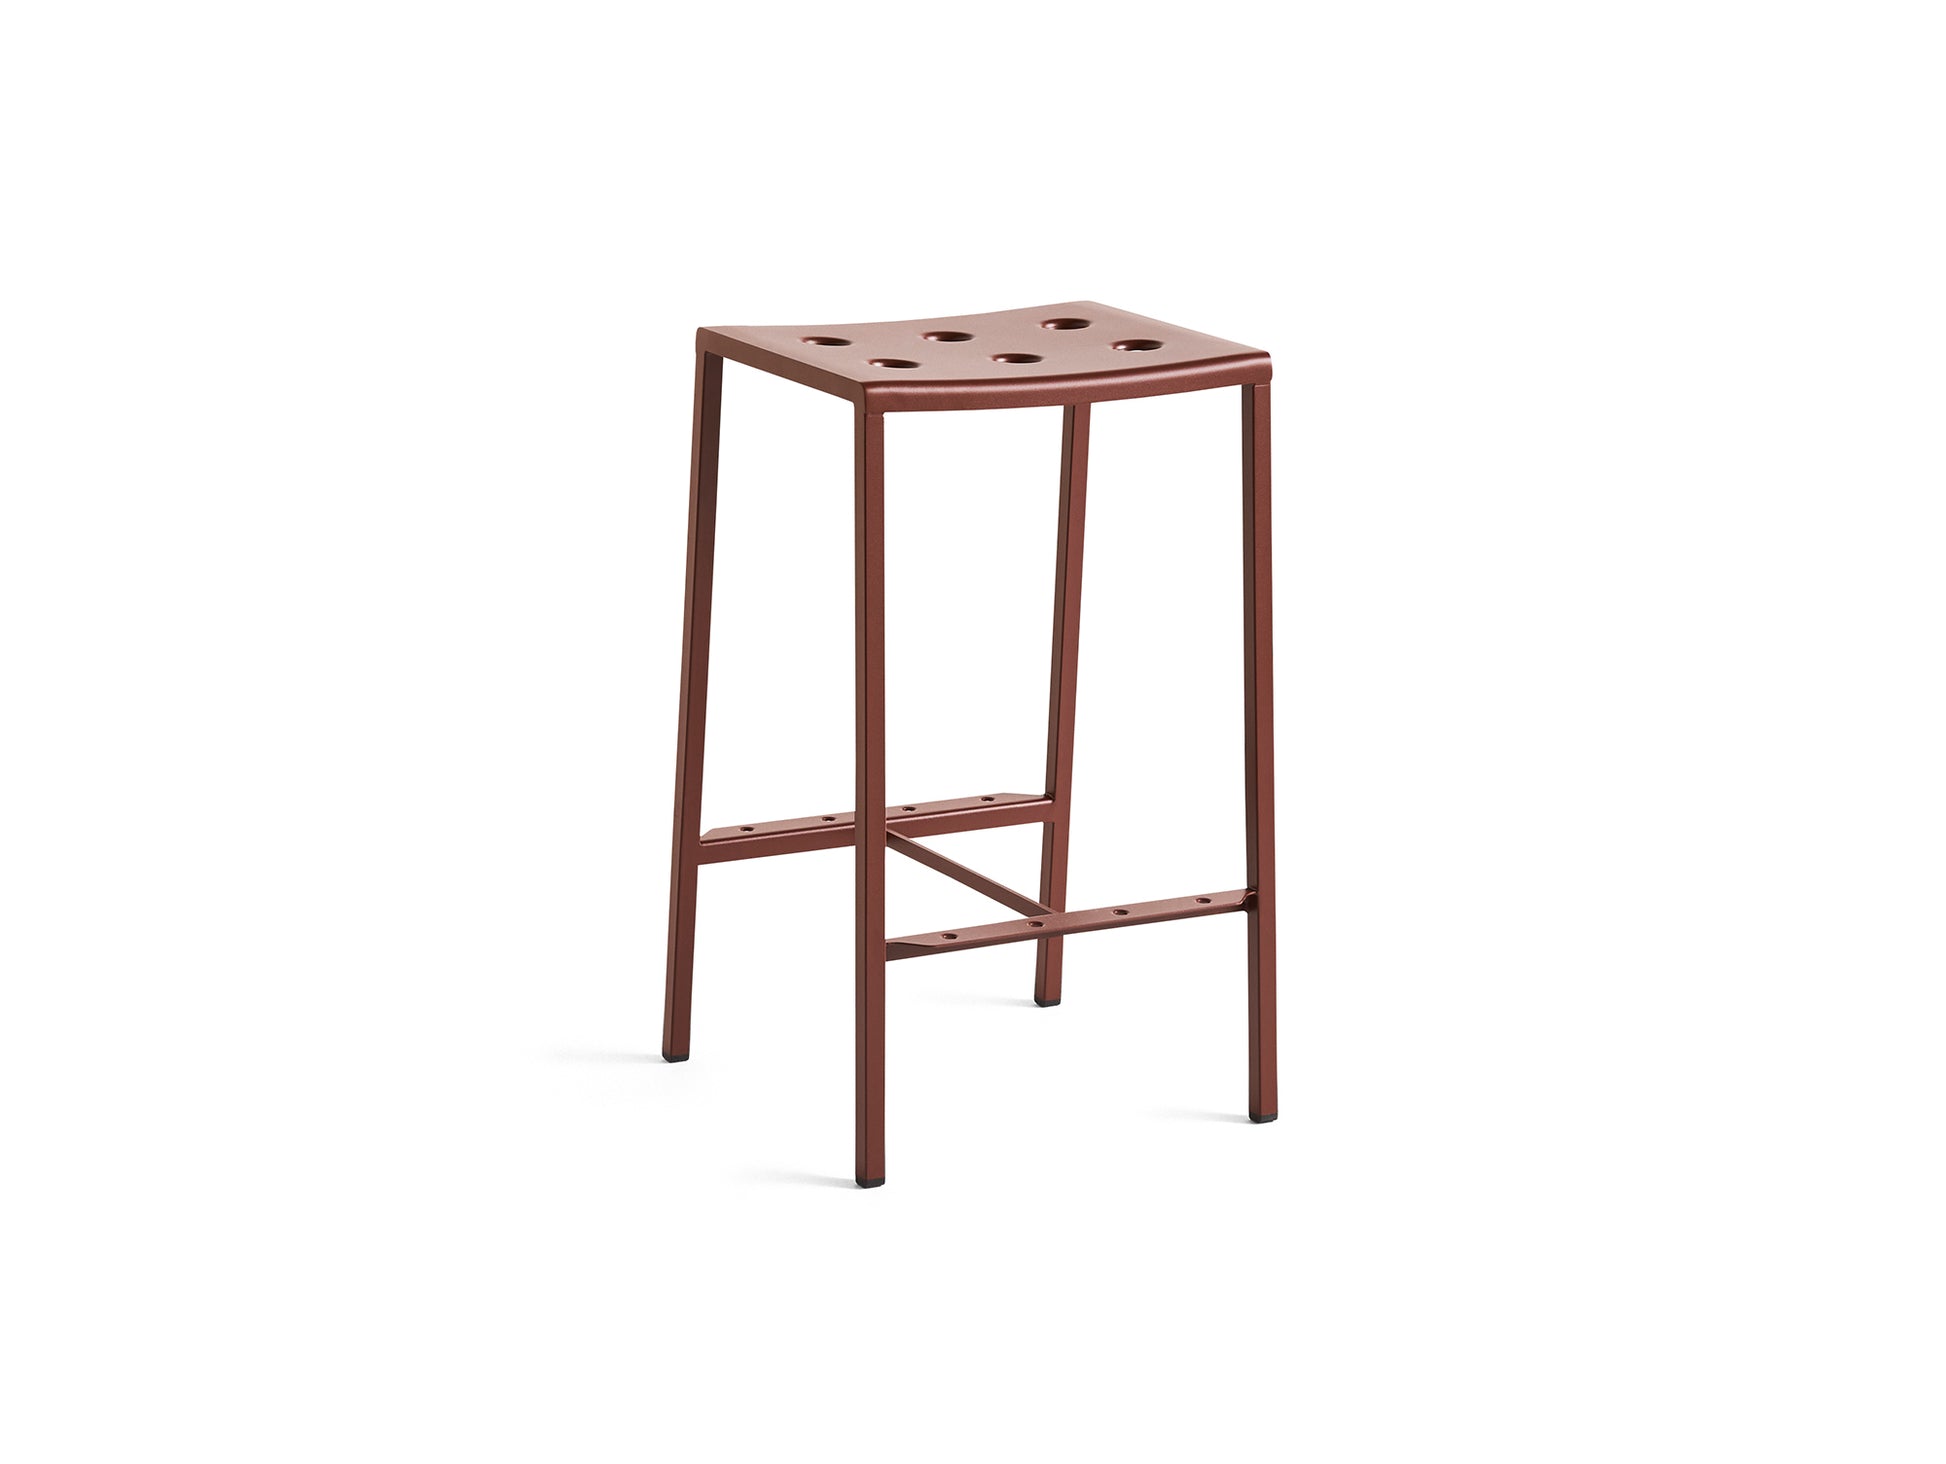 Balcony Outdoor Bar Stool Low by HAY - Iron Red 